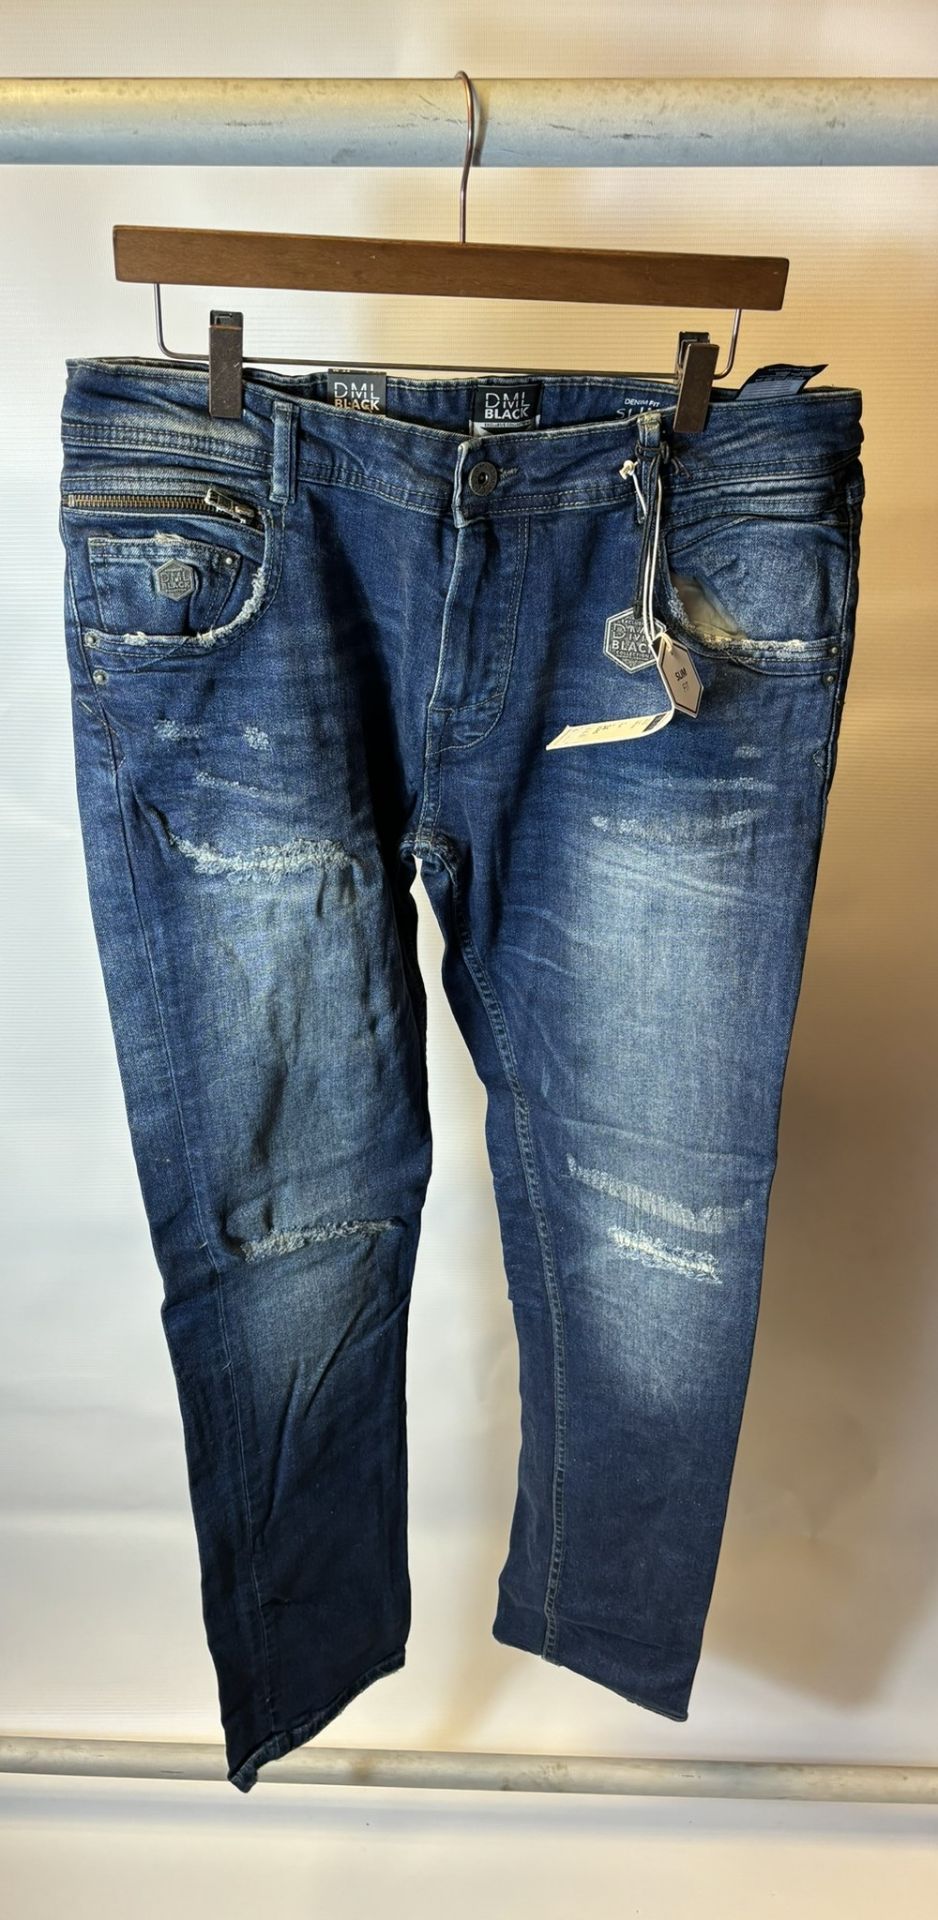 13 x Pairs Of various Sized DML Jeans Prophecy & Voyage Blue Jeans - Image 10 of 39